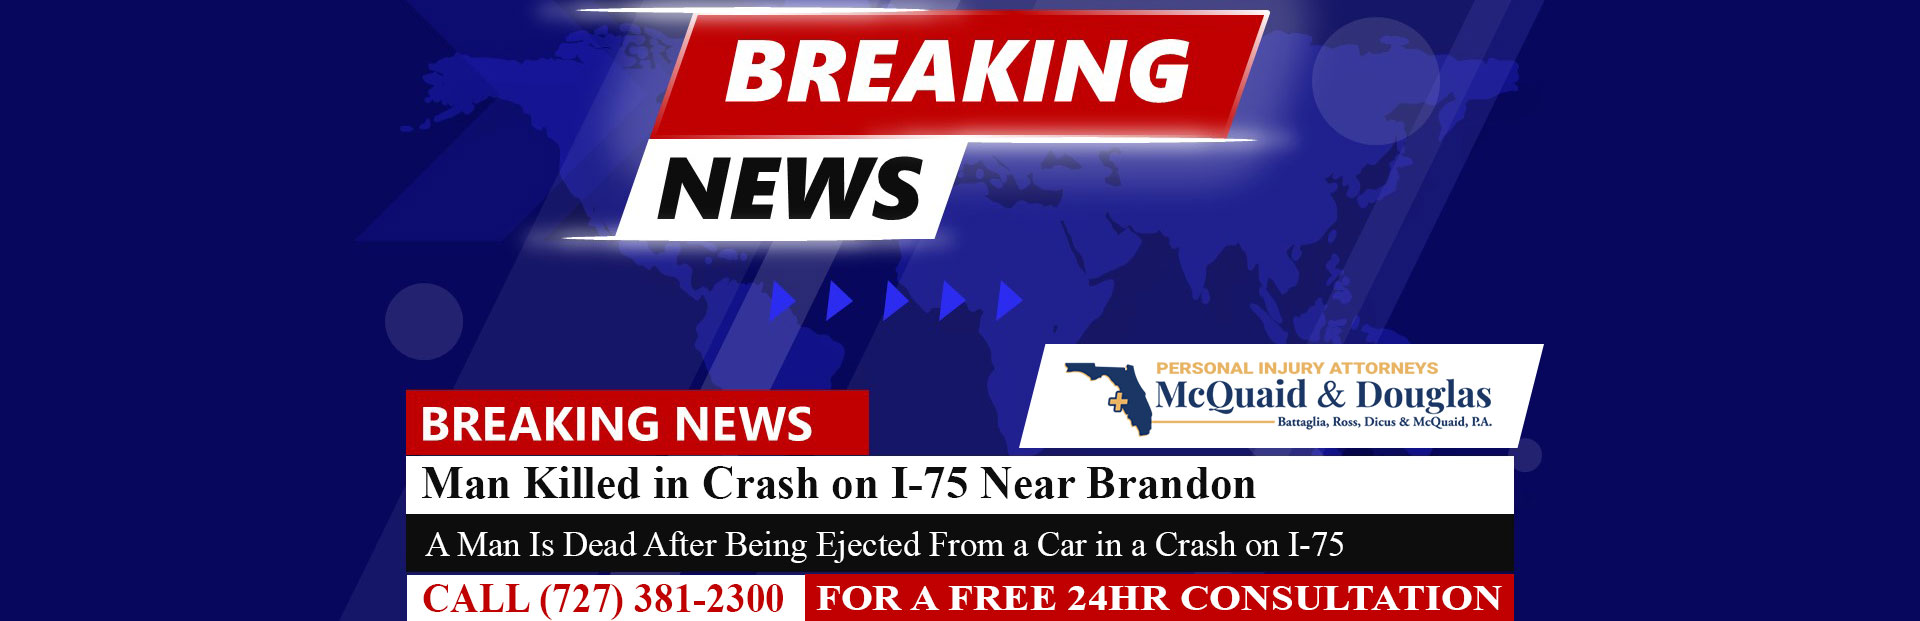 [11-03-23] Man Killed in Crash on I-75 Near Brandon After Being Ejected From Car